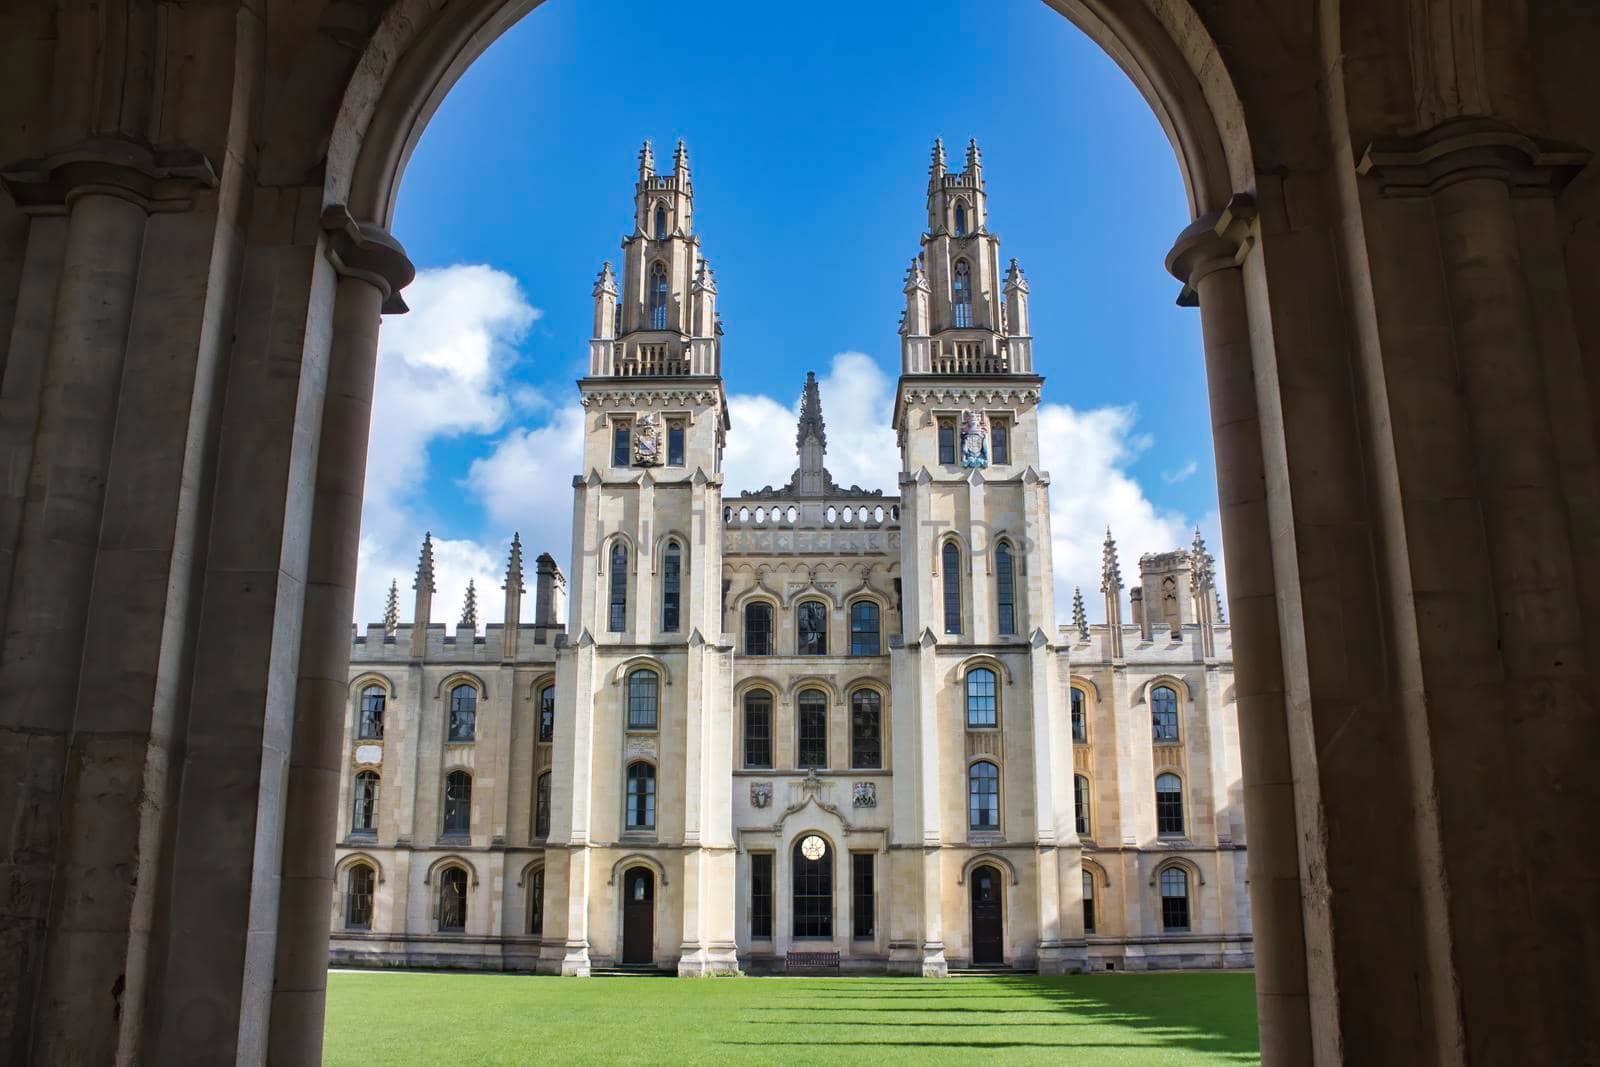 All Souls college, Oxford university - front view of entrance with towers and the green lawn from an archway